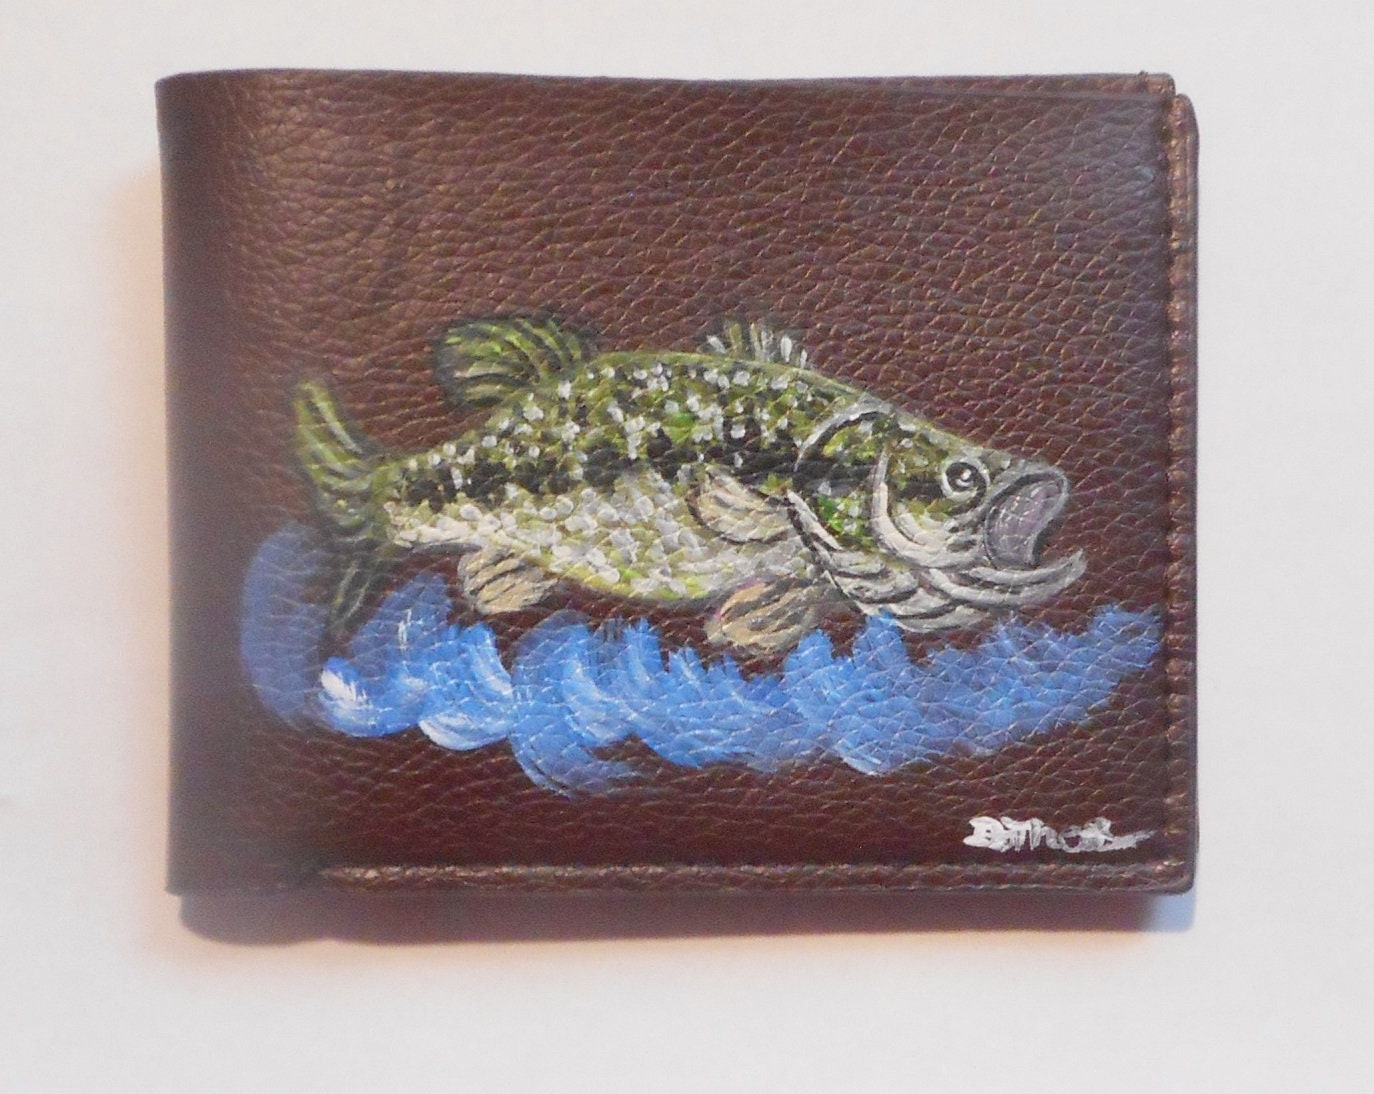 Scary Fish Deep Sea Monster Art on Flat Leather Wallet 